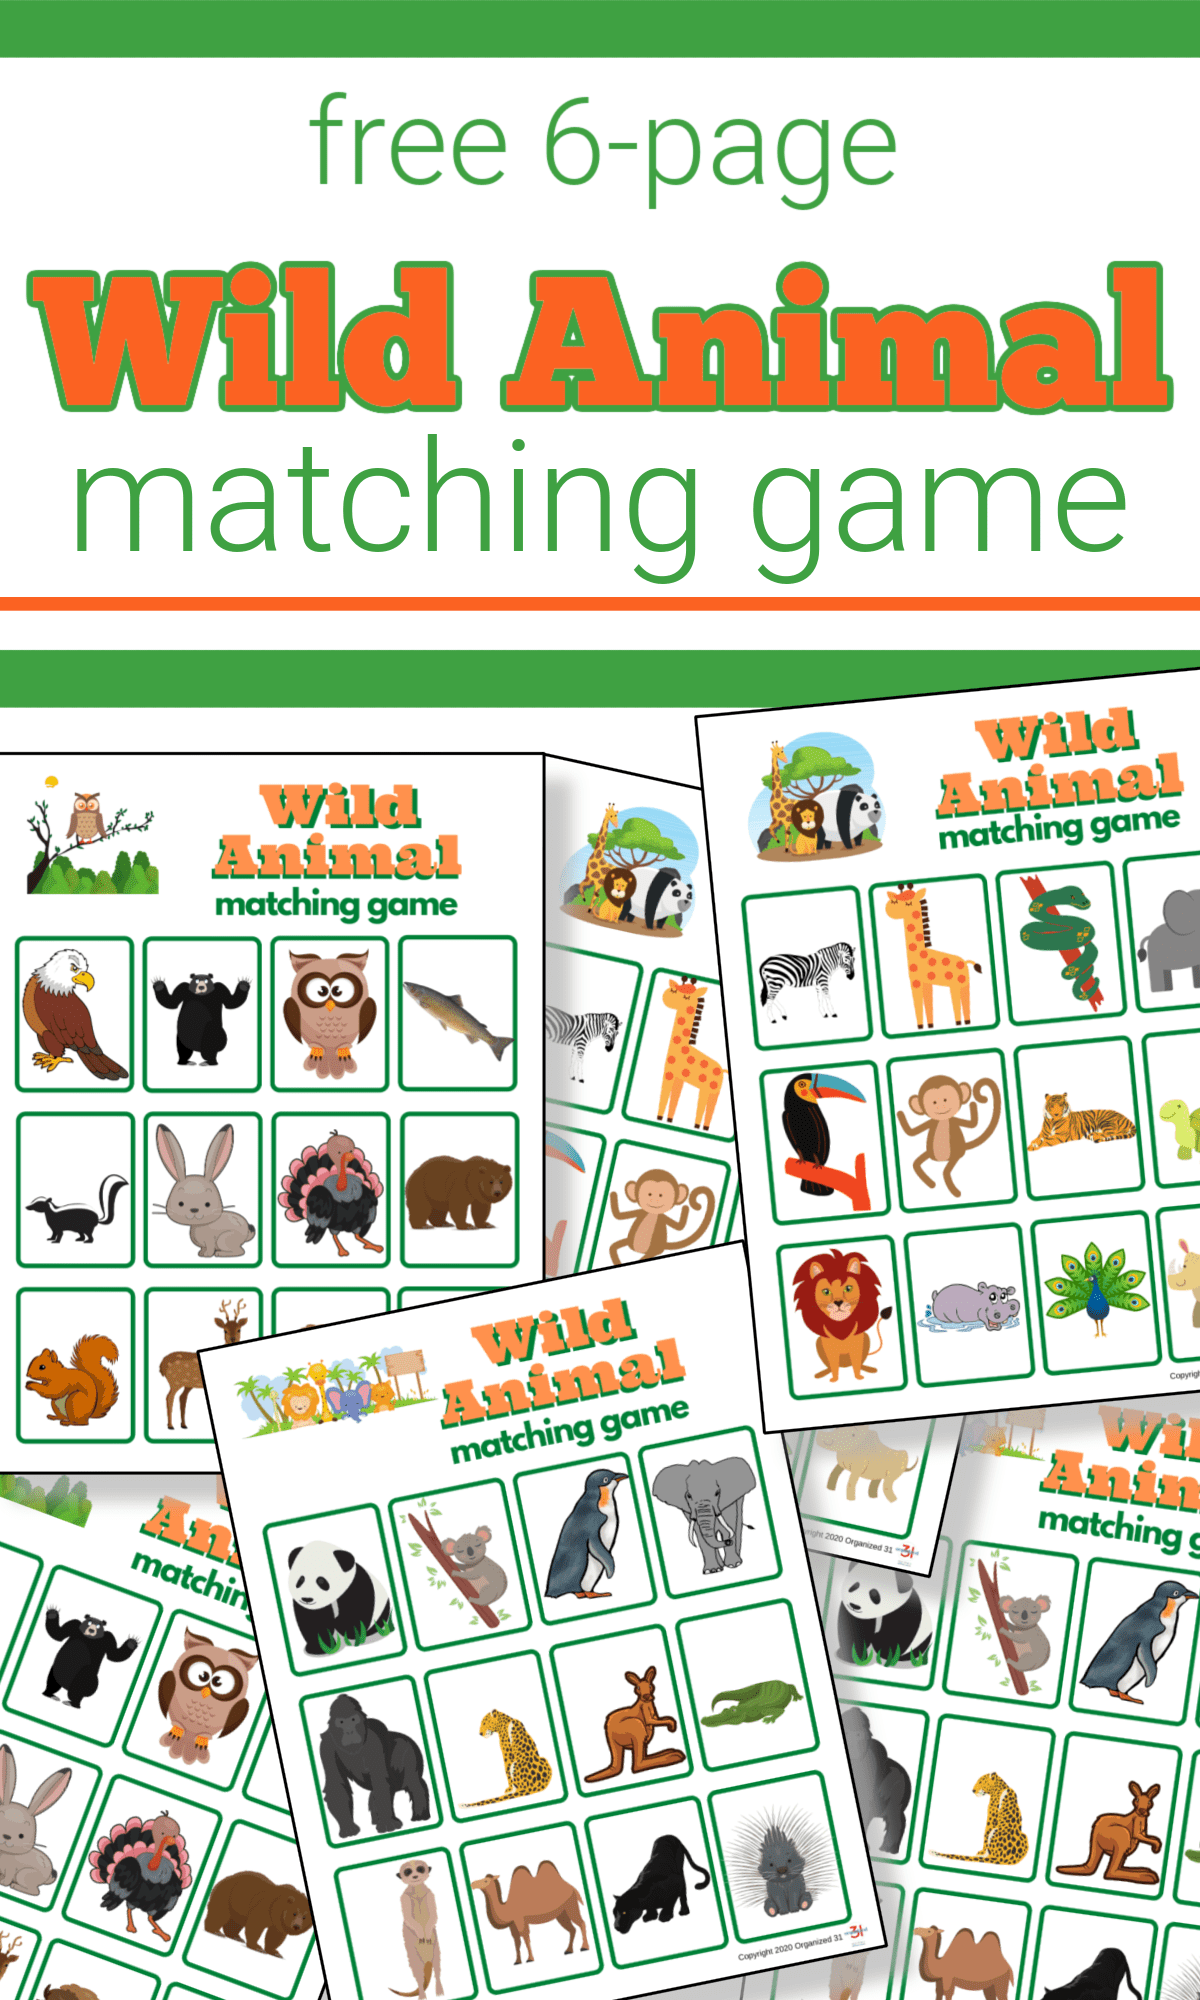 6 sheets of colorful wild animal memory game cards with text overlay